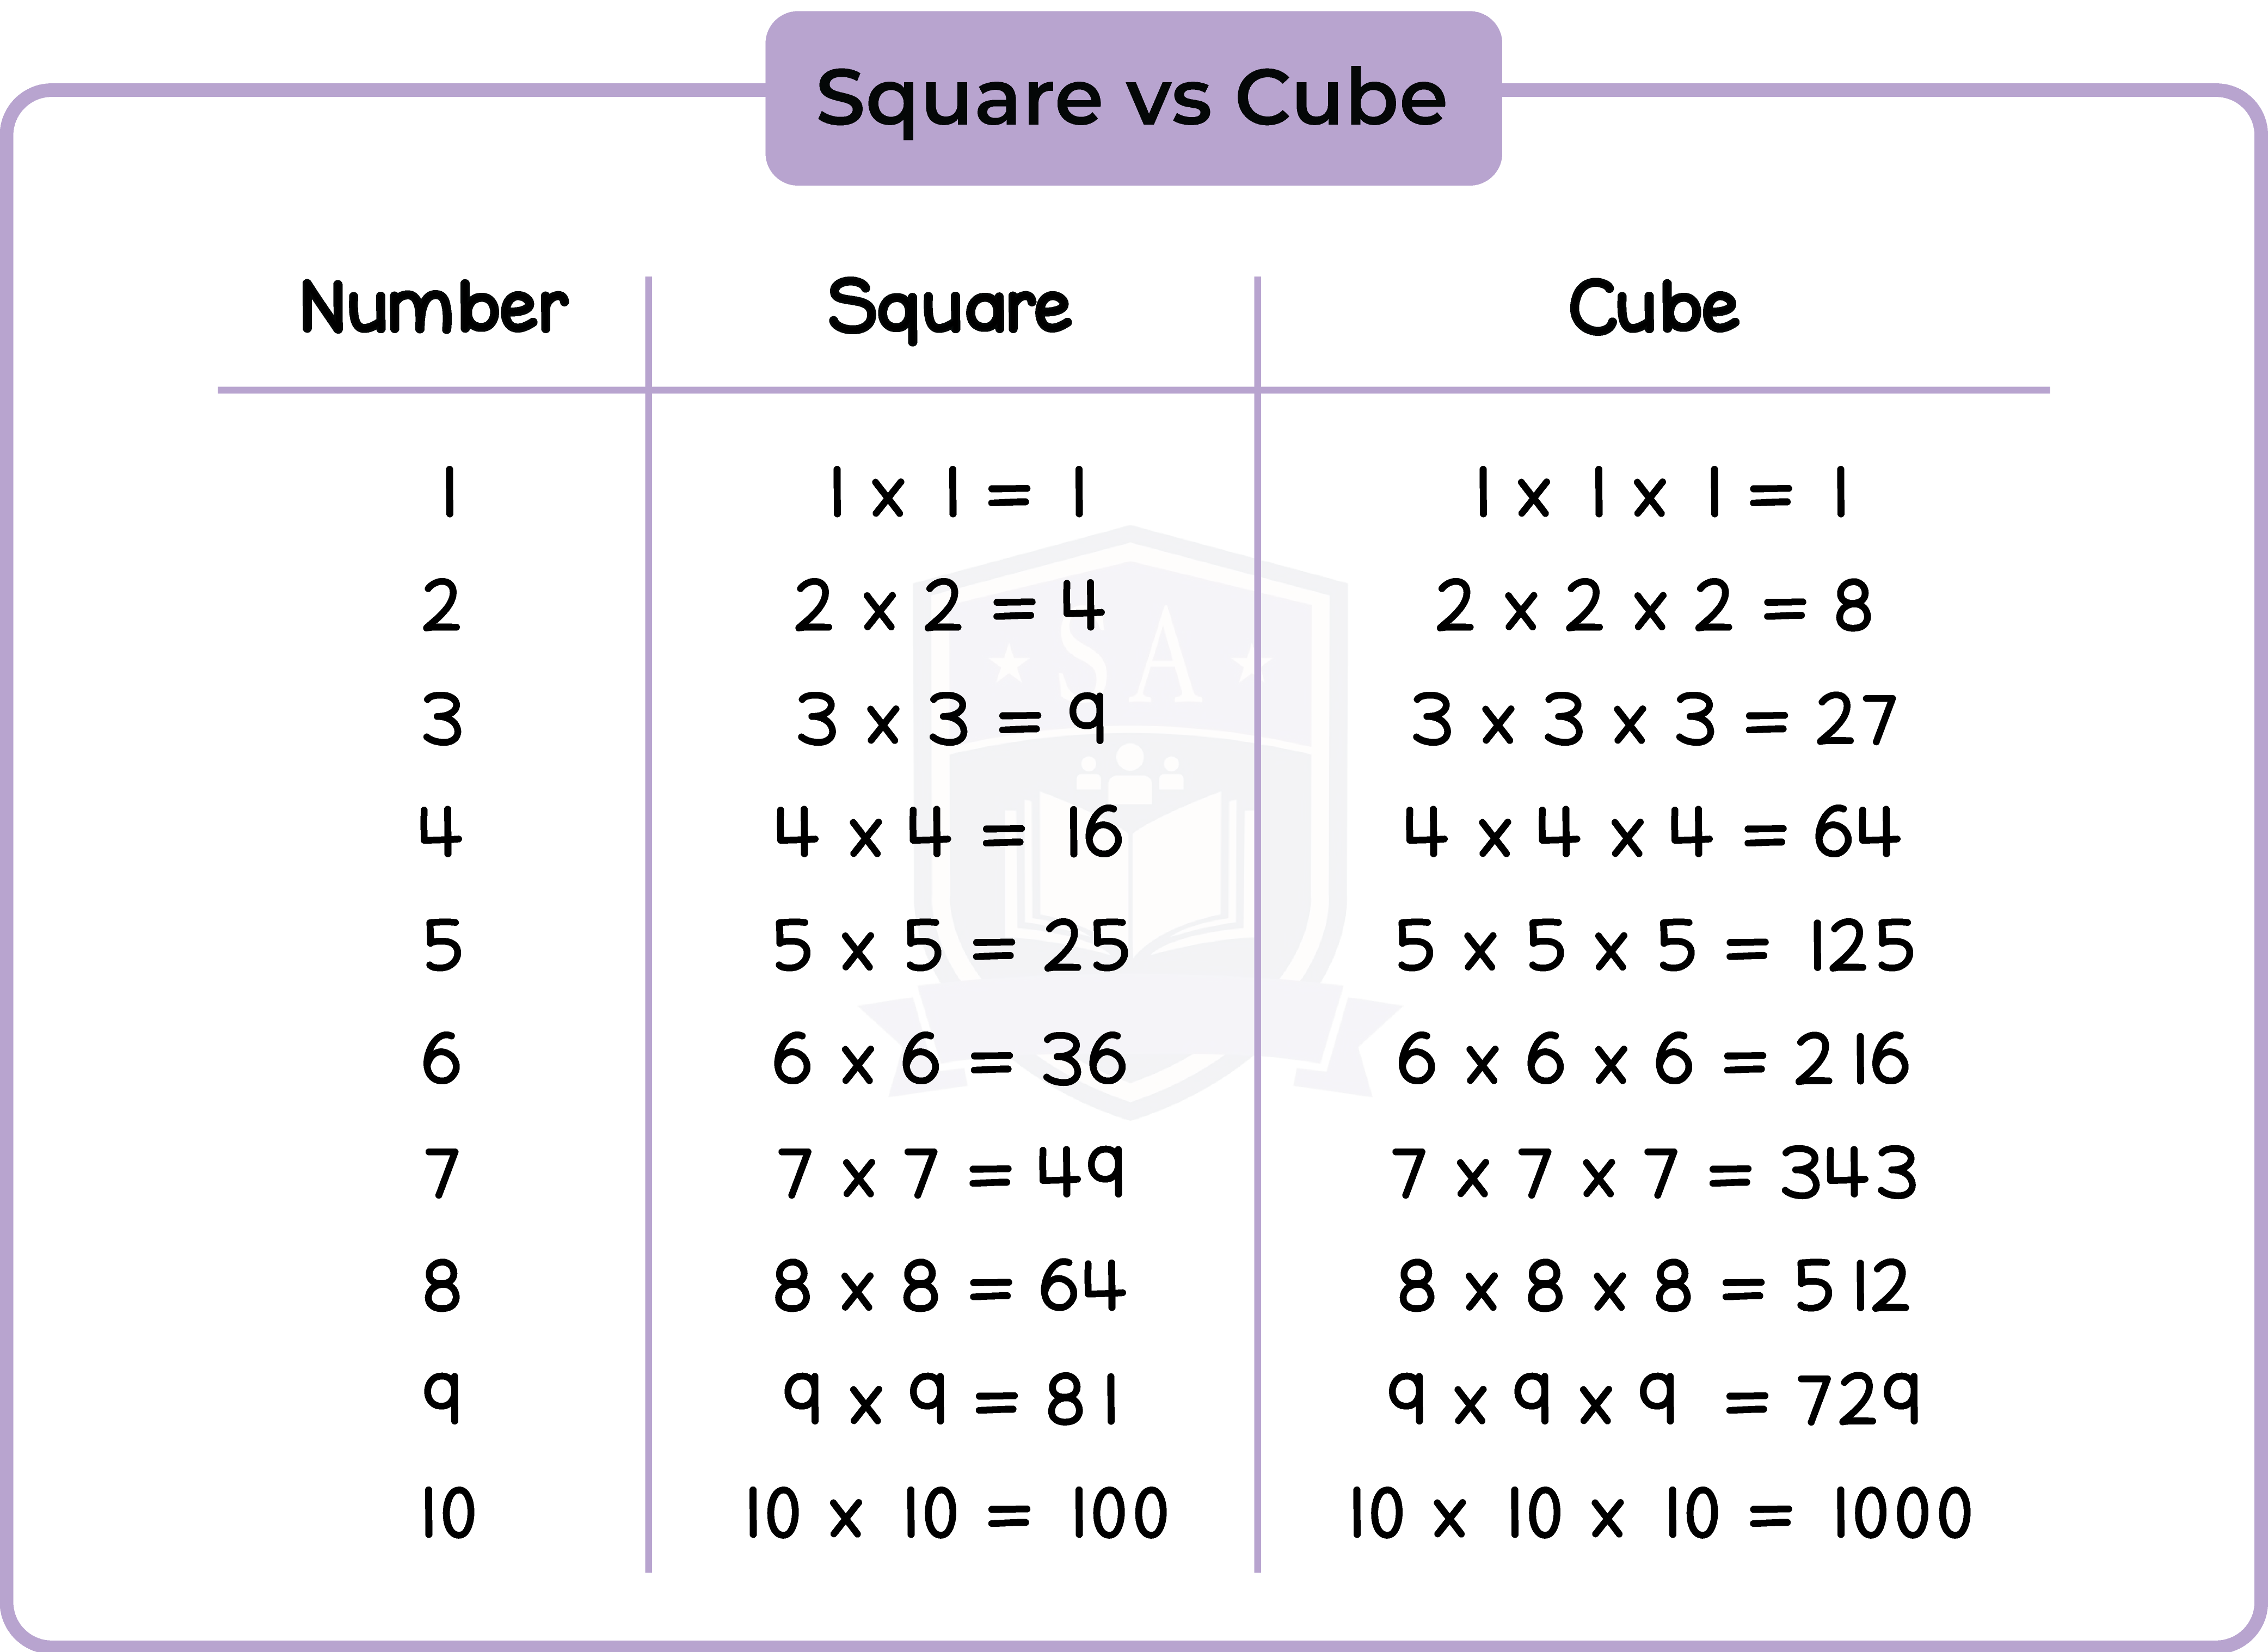 edexcel_igcse_mathematics a_topic 04_powers and roots_001_square vs cube